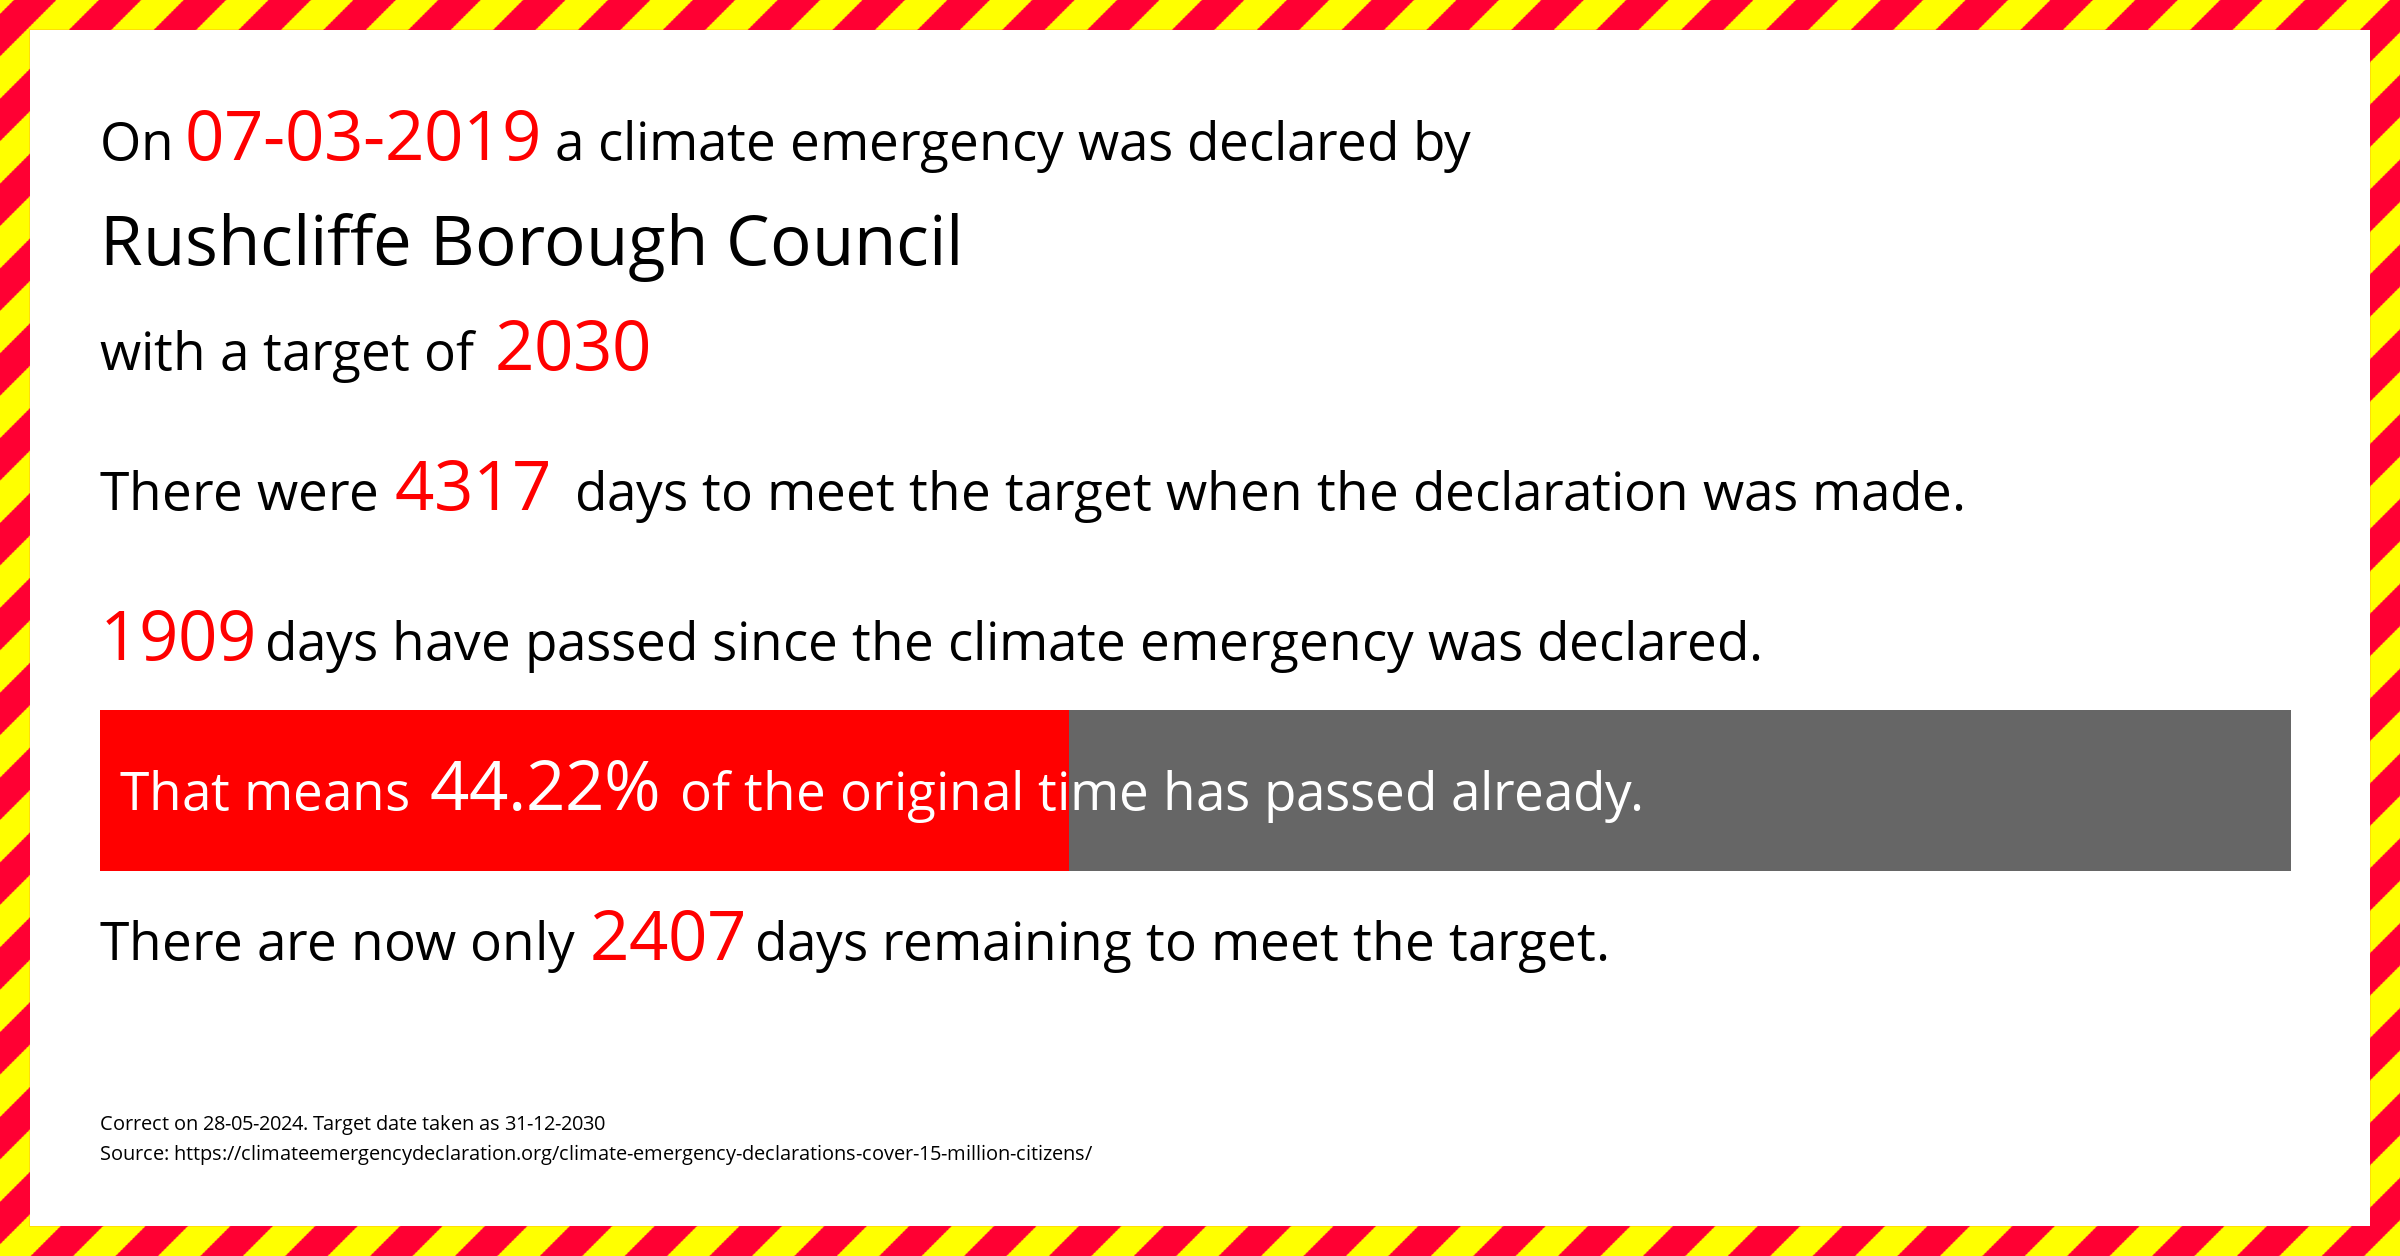 Rushcliffe Borough Council declared a Climate emergency on Thursday 7th March 2019, with a target of 2030.